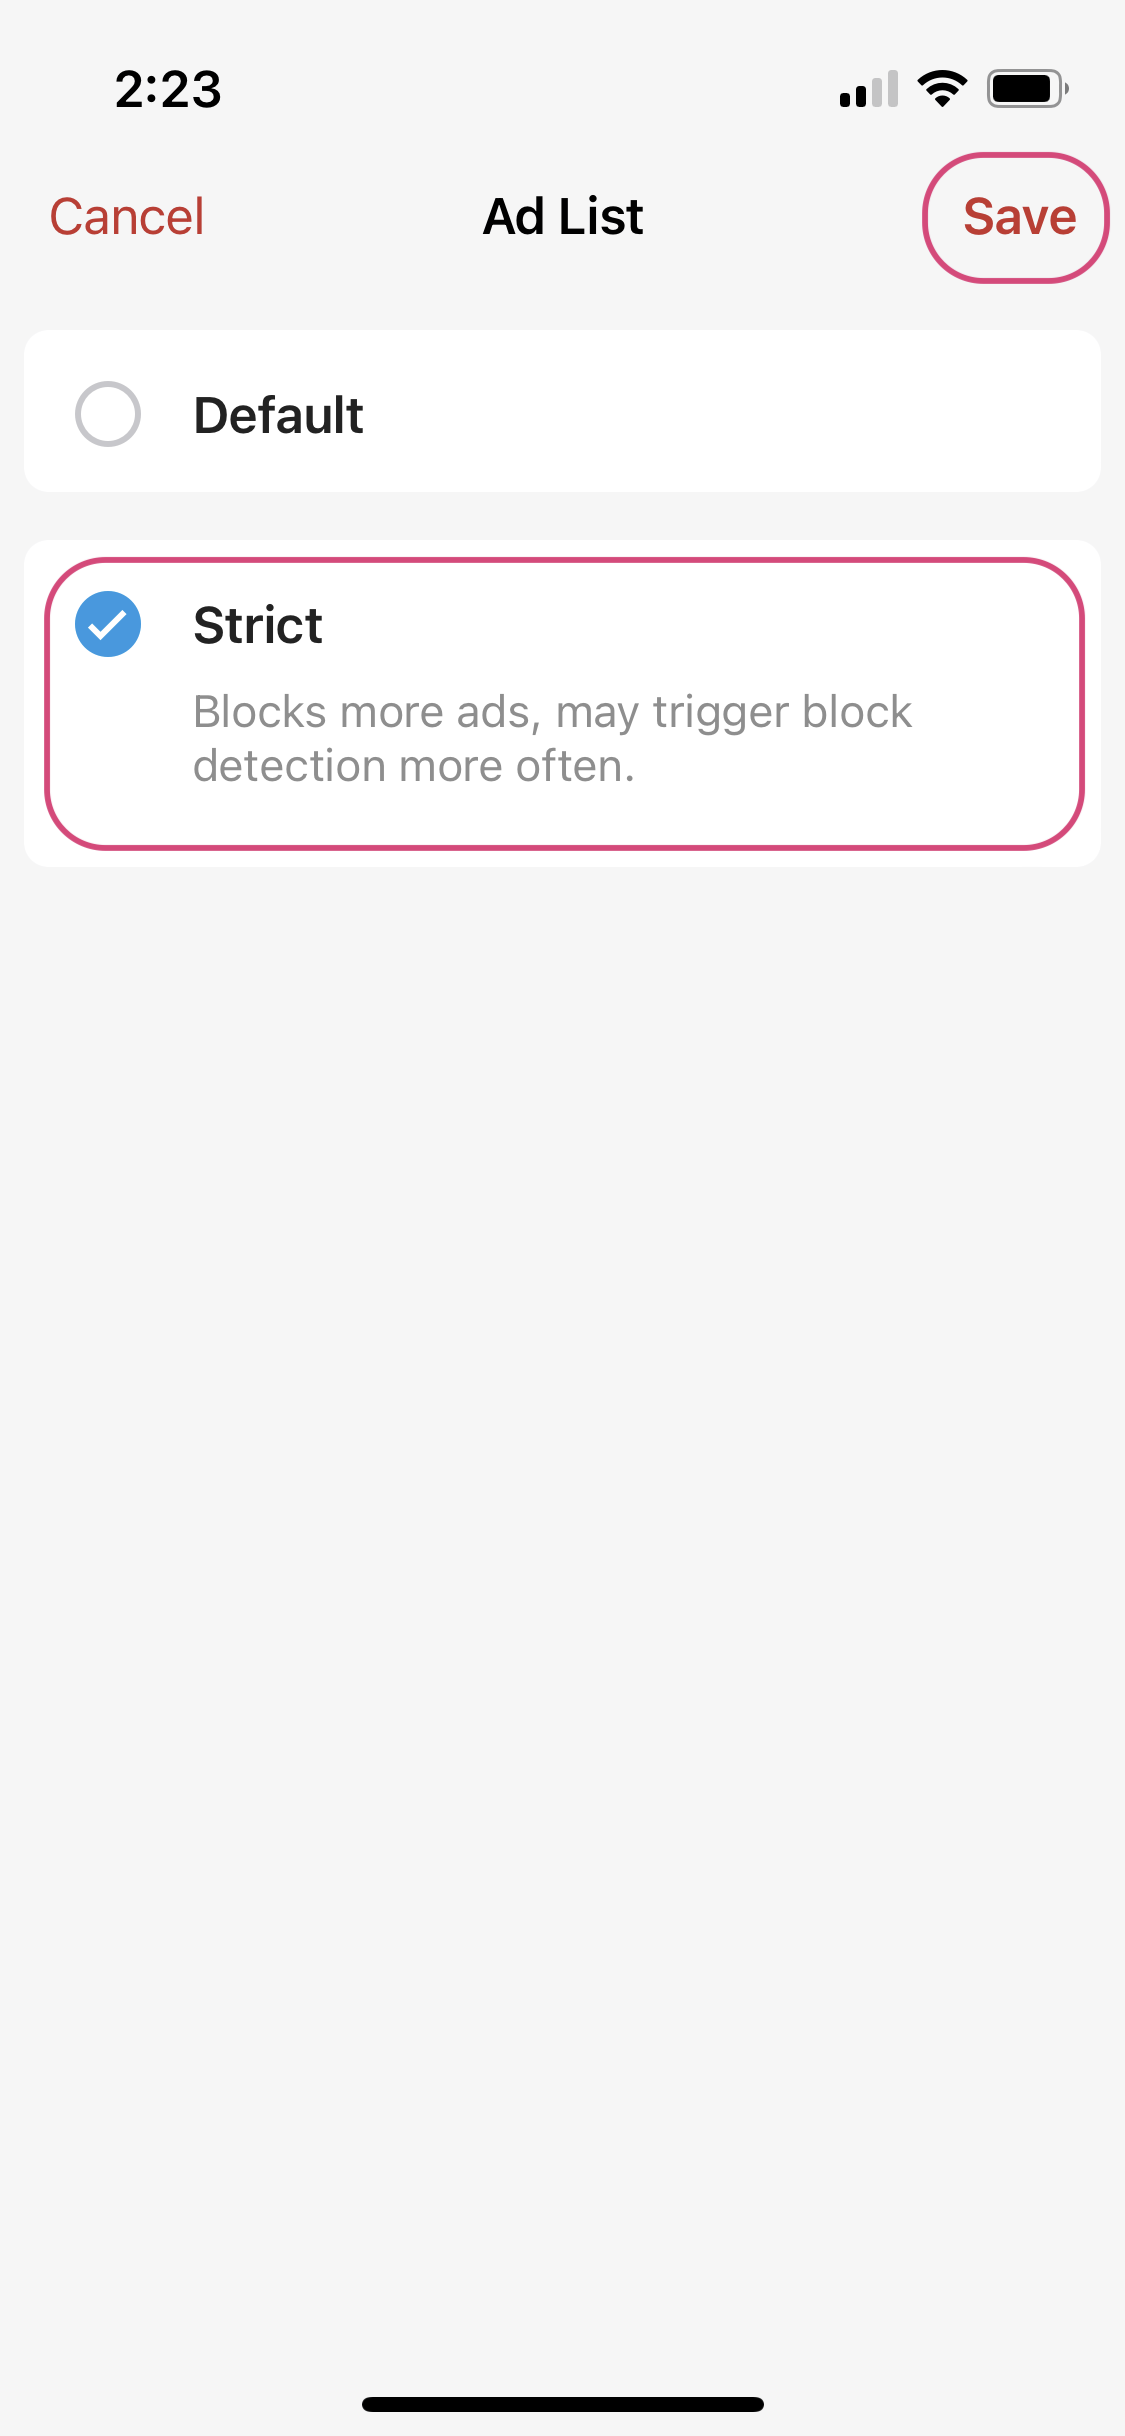 Choose the Default or Strict options and then save to complete the Ad Block set up